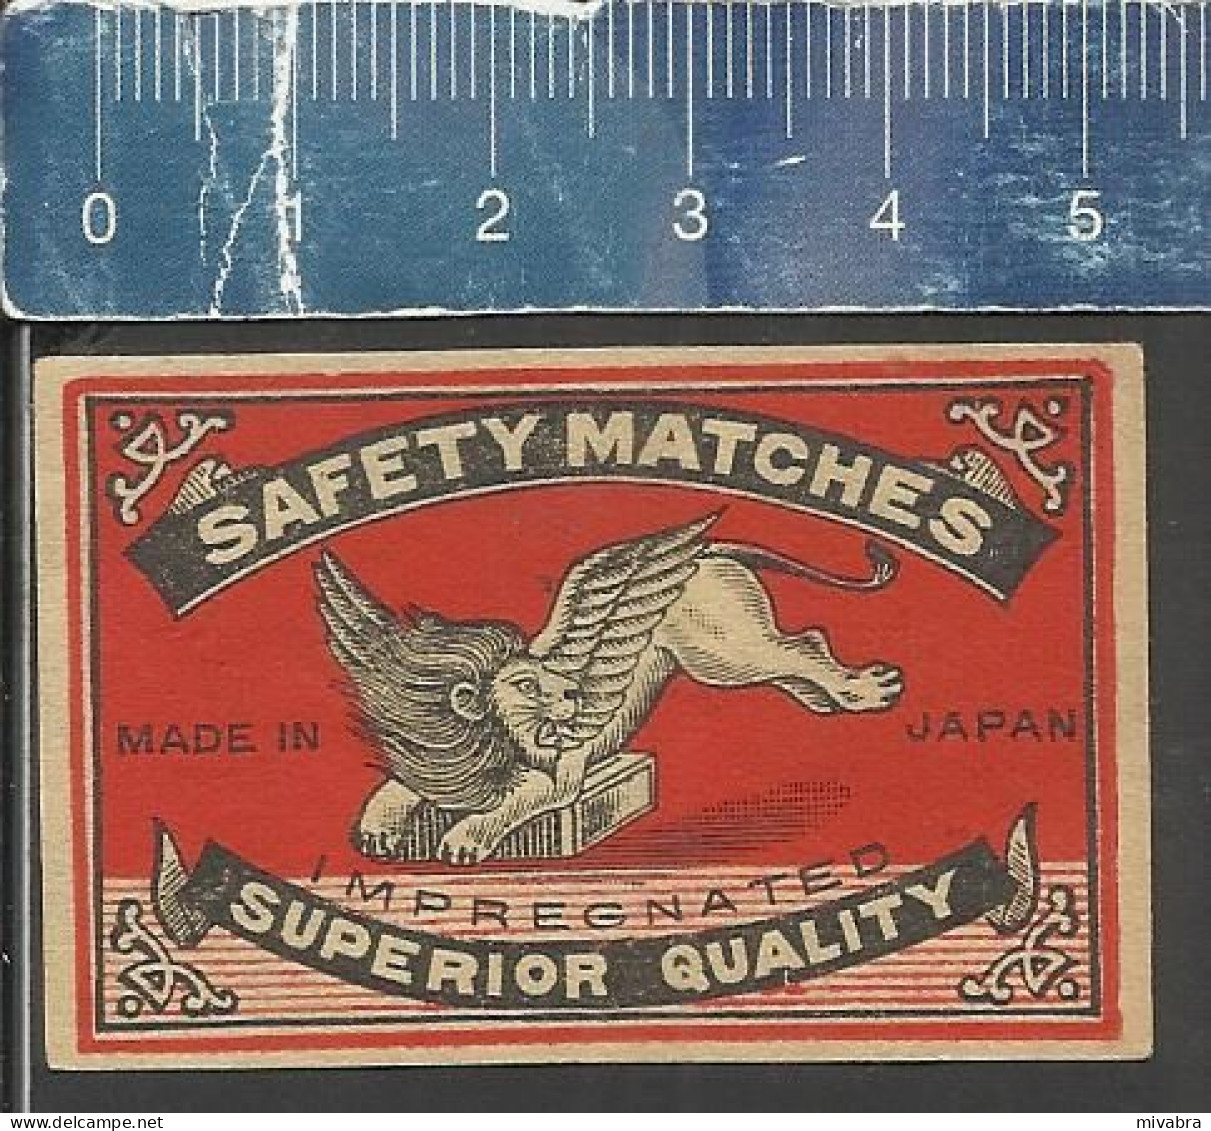 WINGED LION WITH WINGS SAFETY MATCHES IMPREGNATED SUPERIOR QUALITY - OLD VINTAGE MATCHBOX LABEL MADE JAPAN - Scatole Di Fiammiferi - Etichette